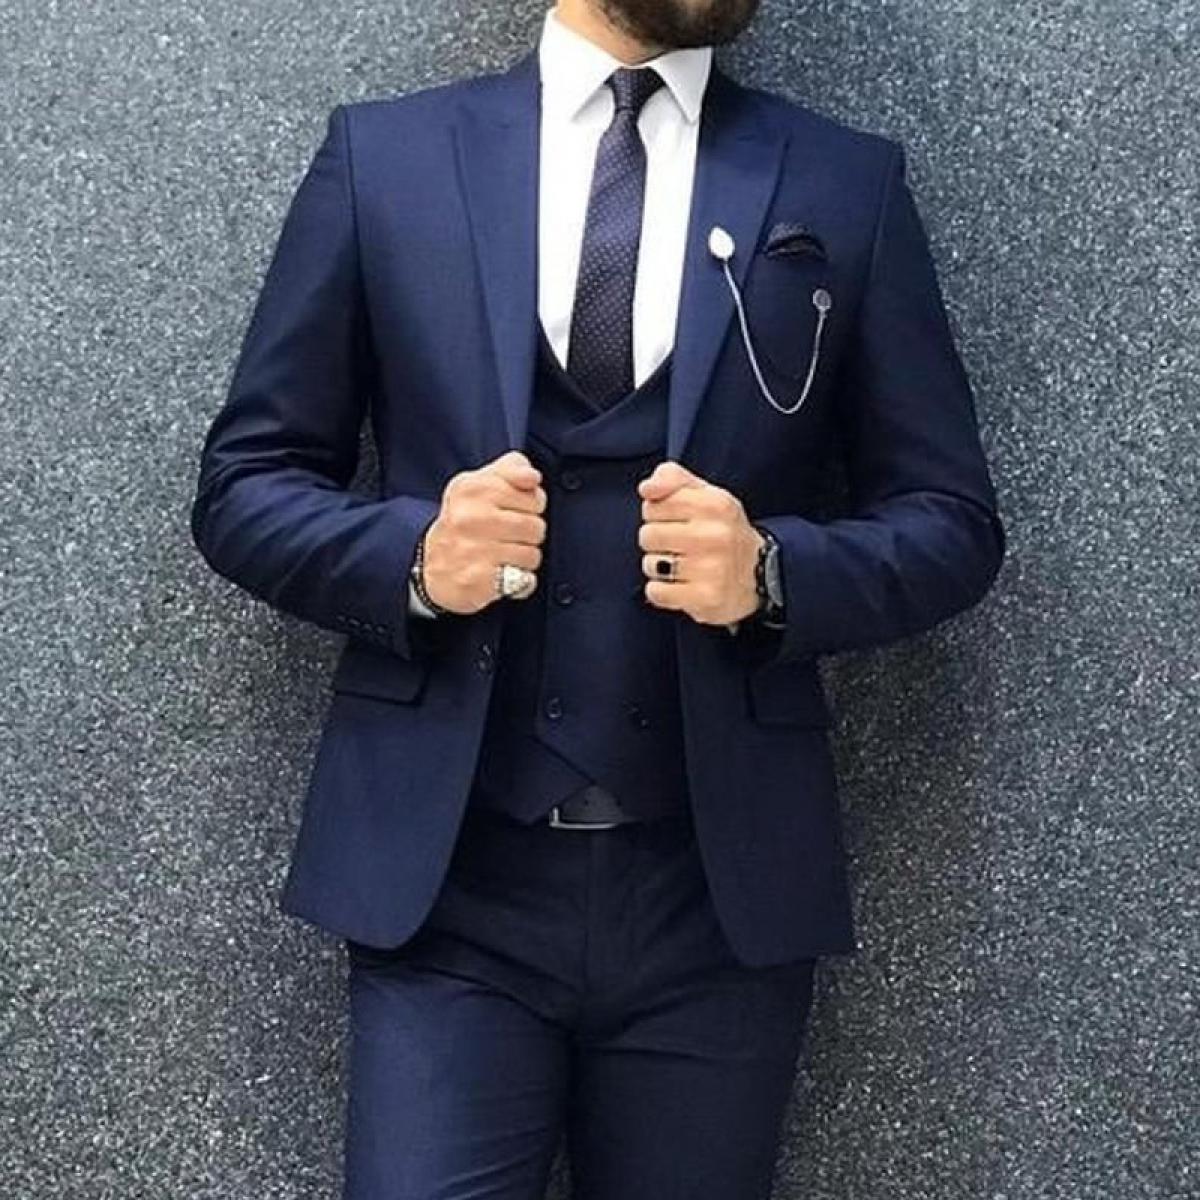 Slim Fit Formal Men Suits With Double Breasted Waistcoat Navy Blue Male Fashion Jacket Pants 3 Piece Wedding Tuxedo For 